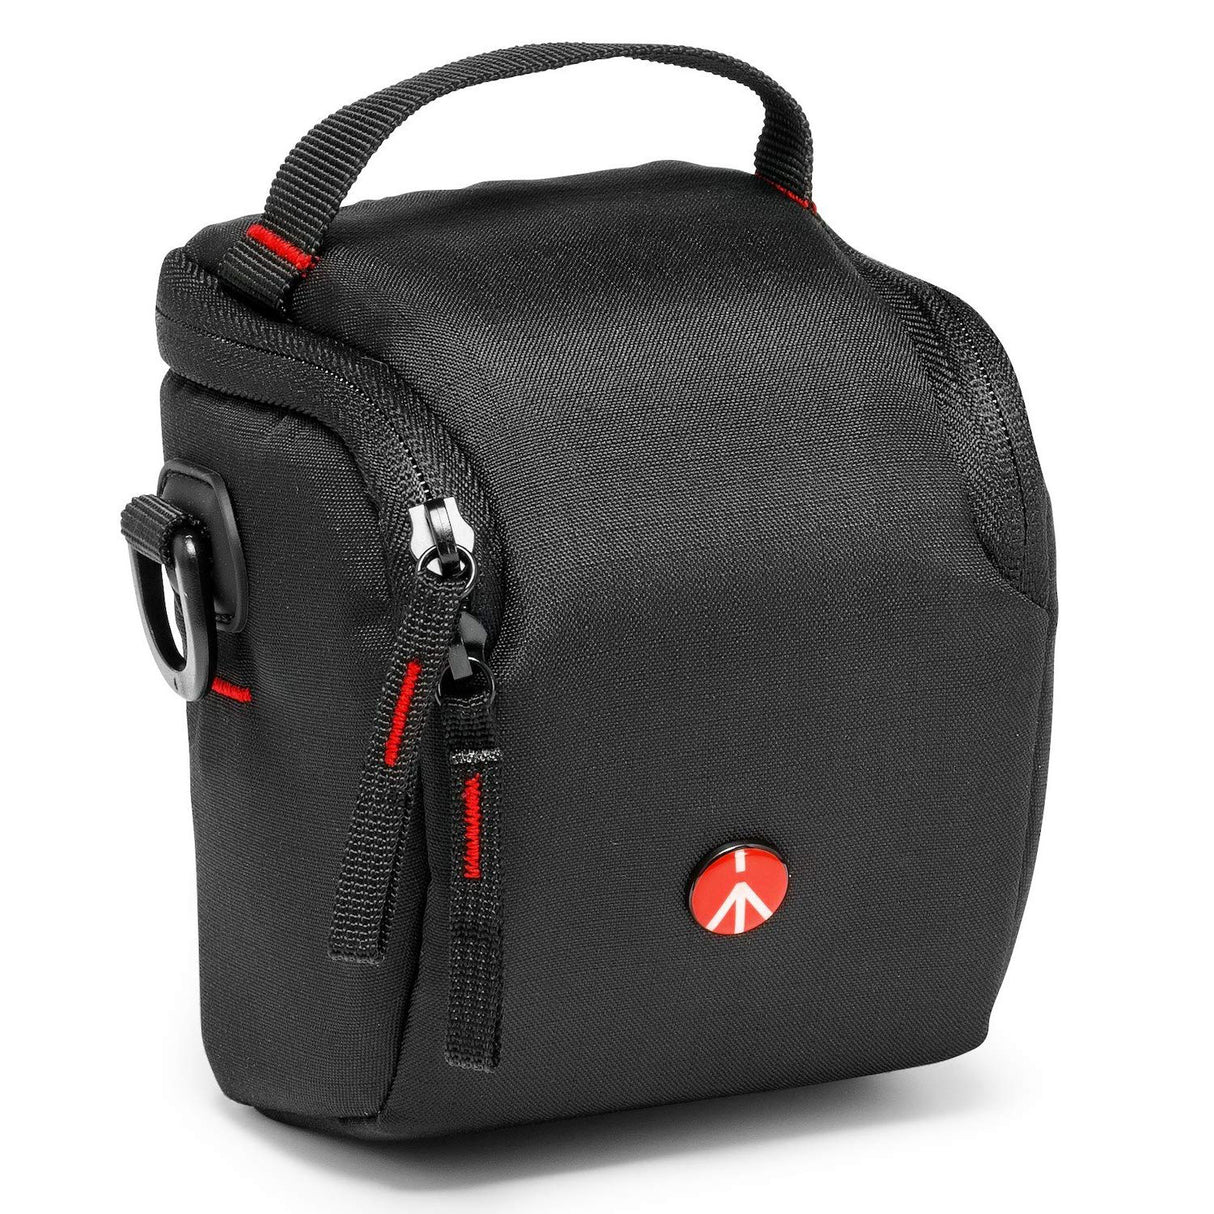 Manfrotto Holster Bag for Camera – Black